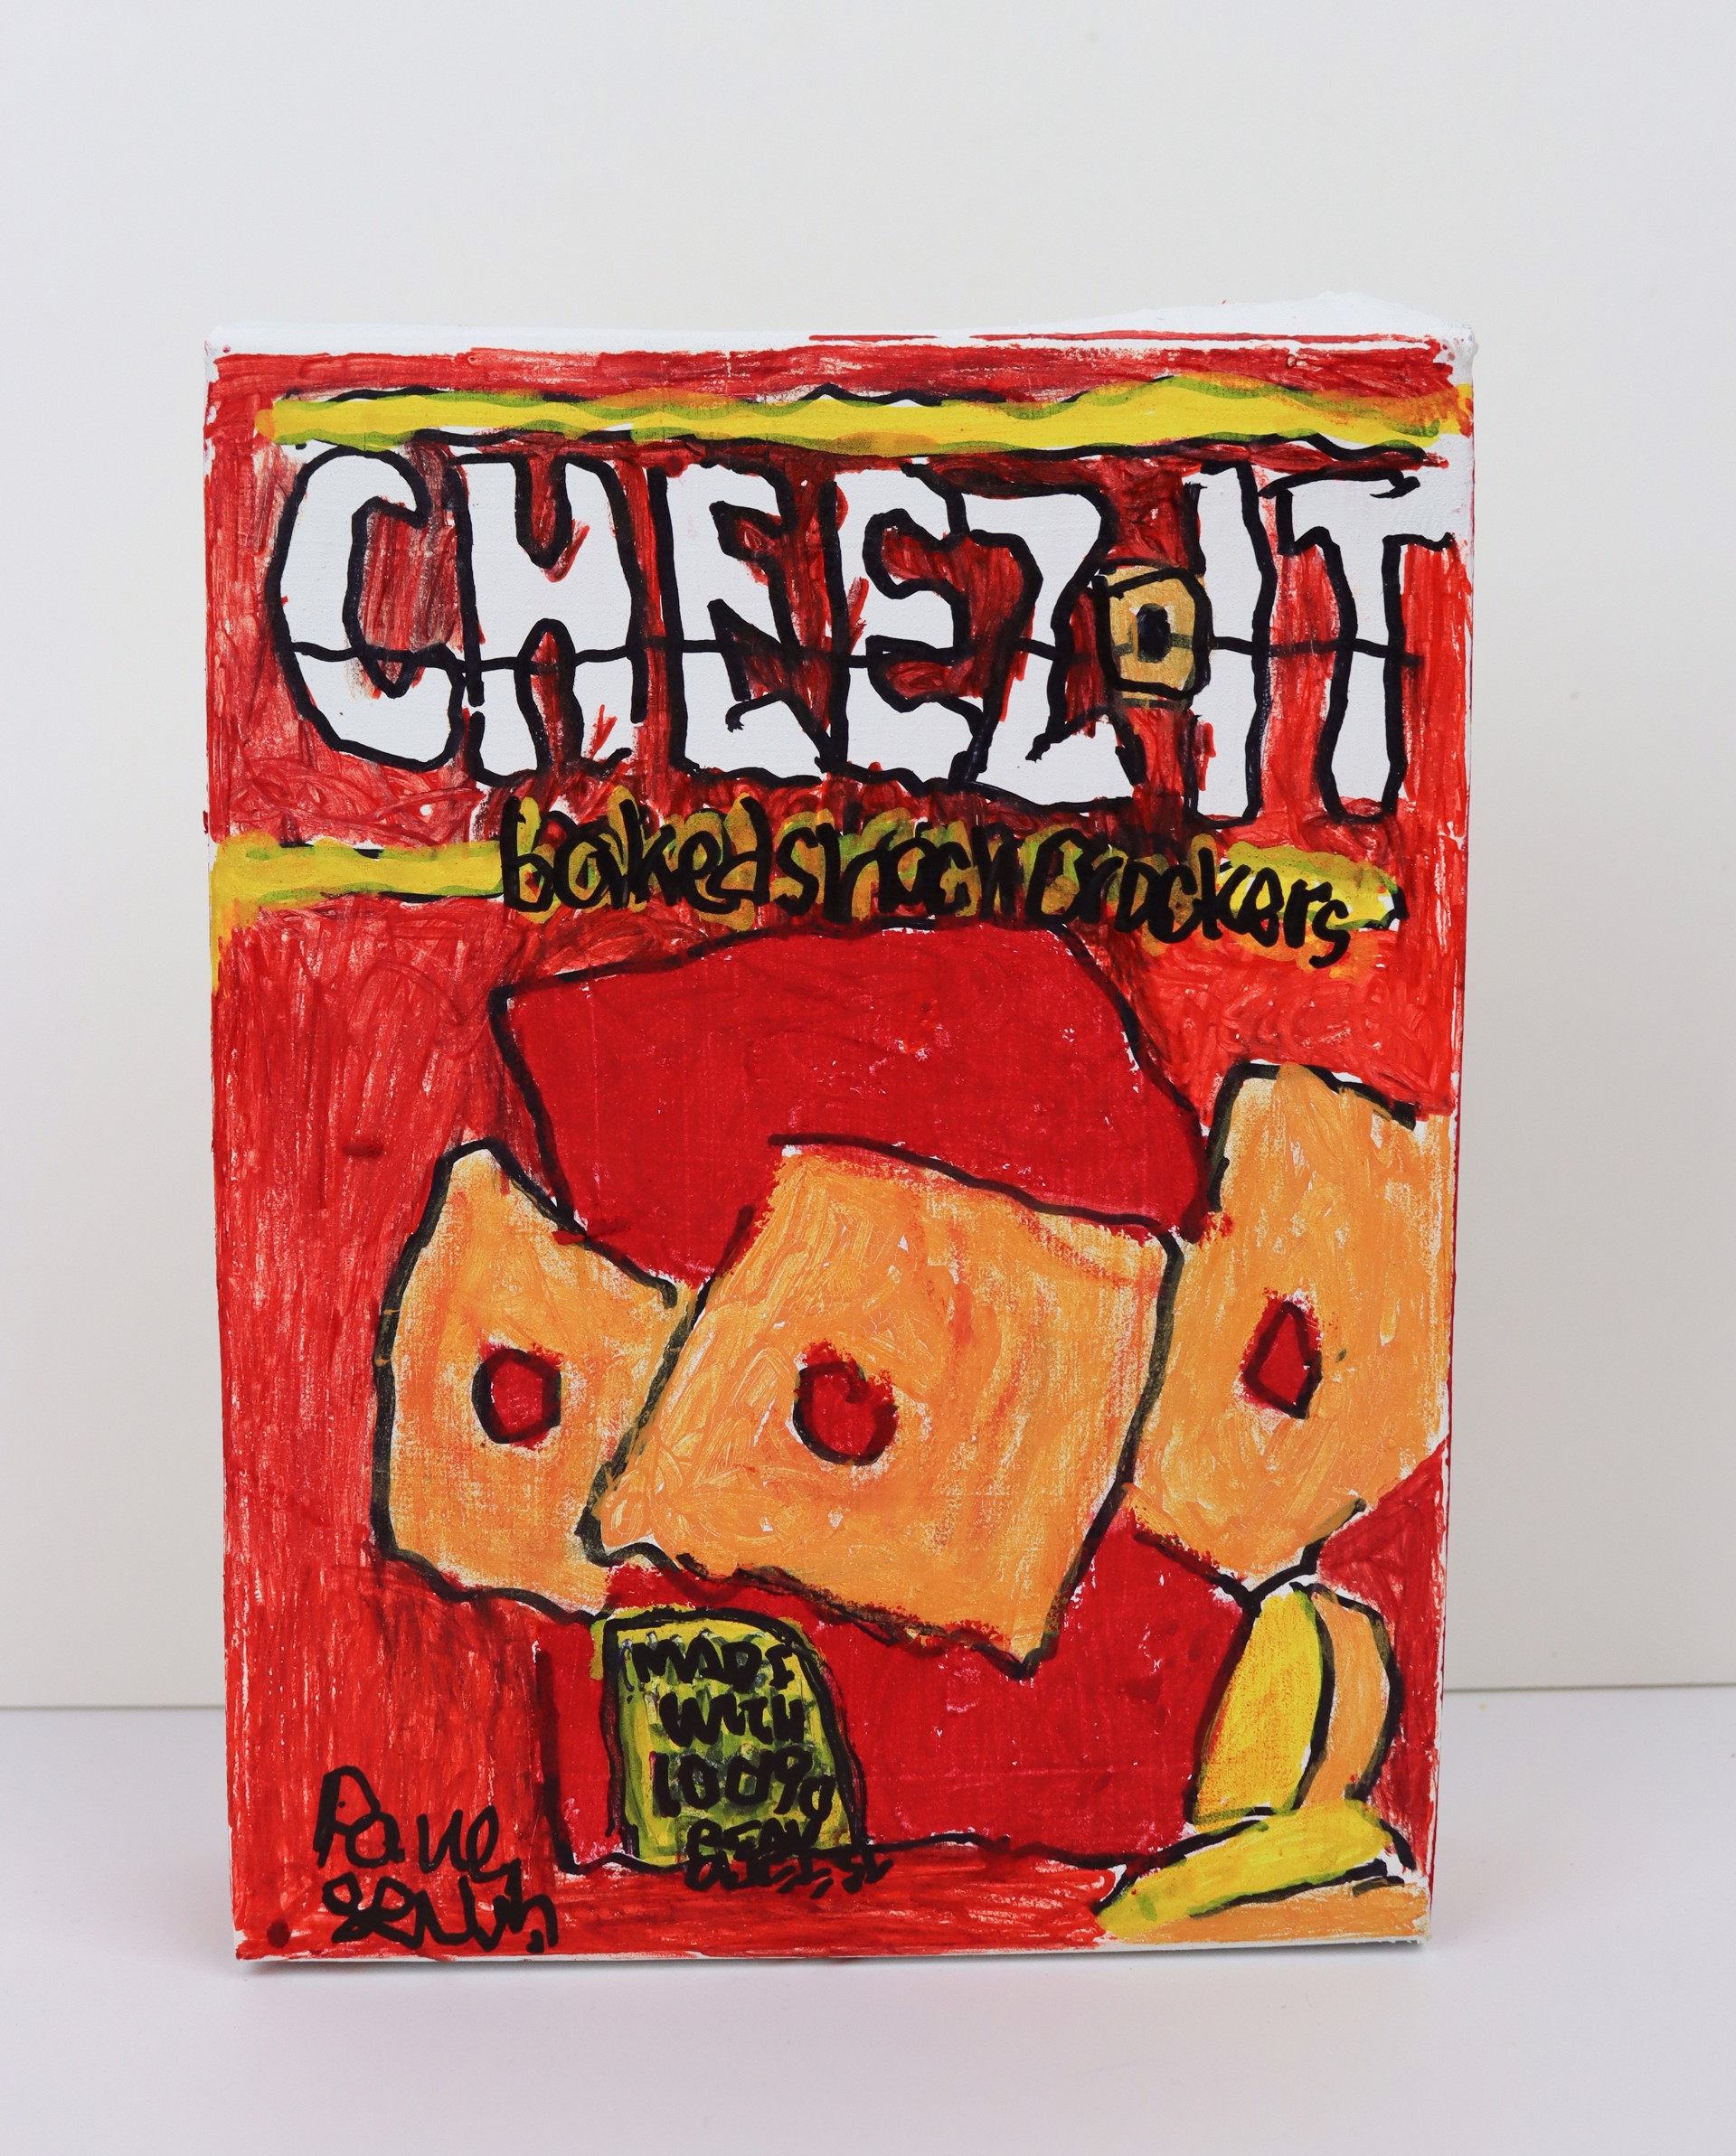 Cheez-Its by Paul Lewis